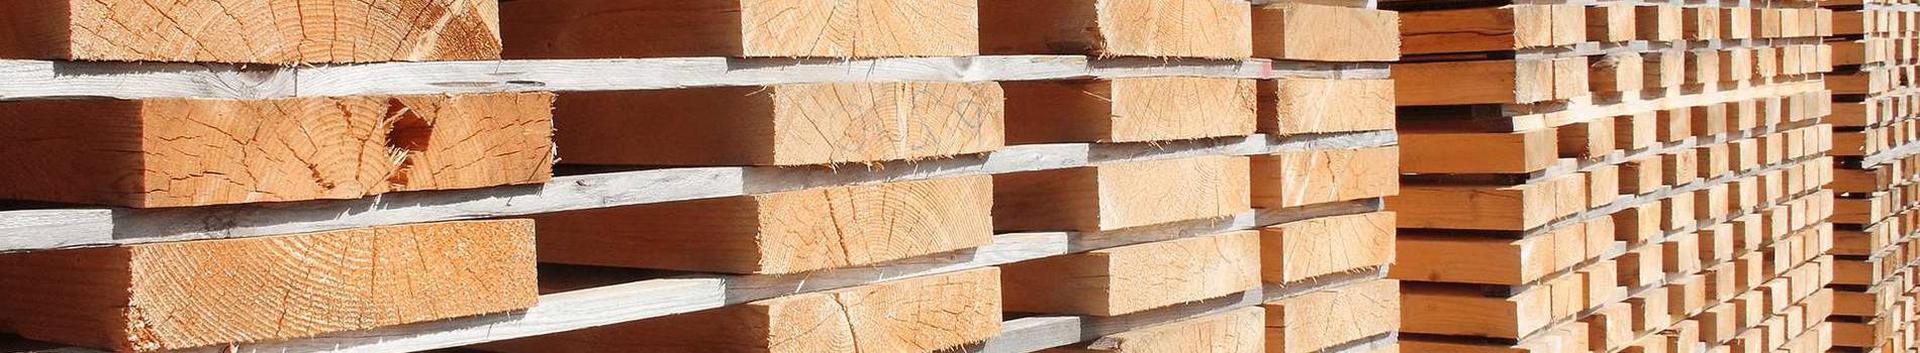 AS Laesti operates two sawmills: Savi sawmill and Sauga sawmill with combined annual production of about 120000m3 sawn timber with ratio 40-60 pine/spruce.